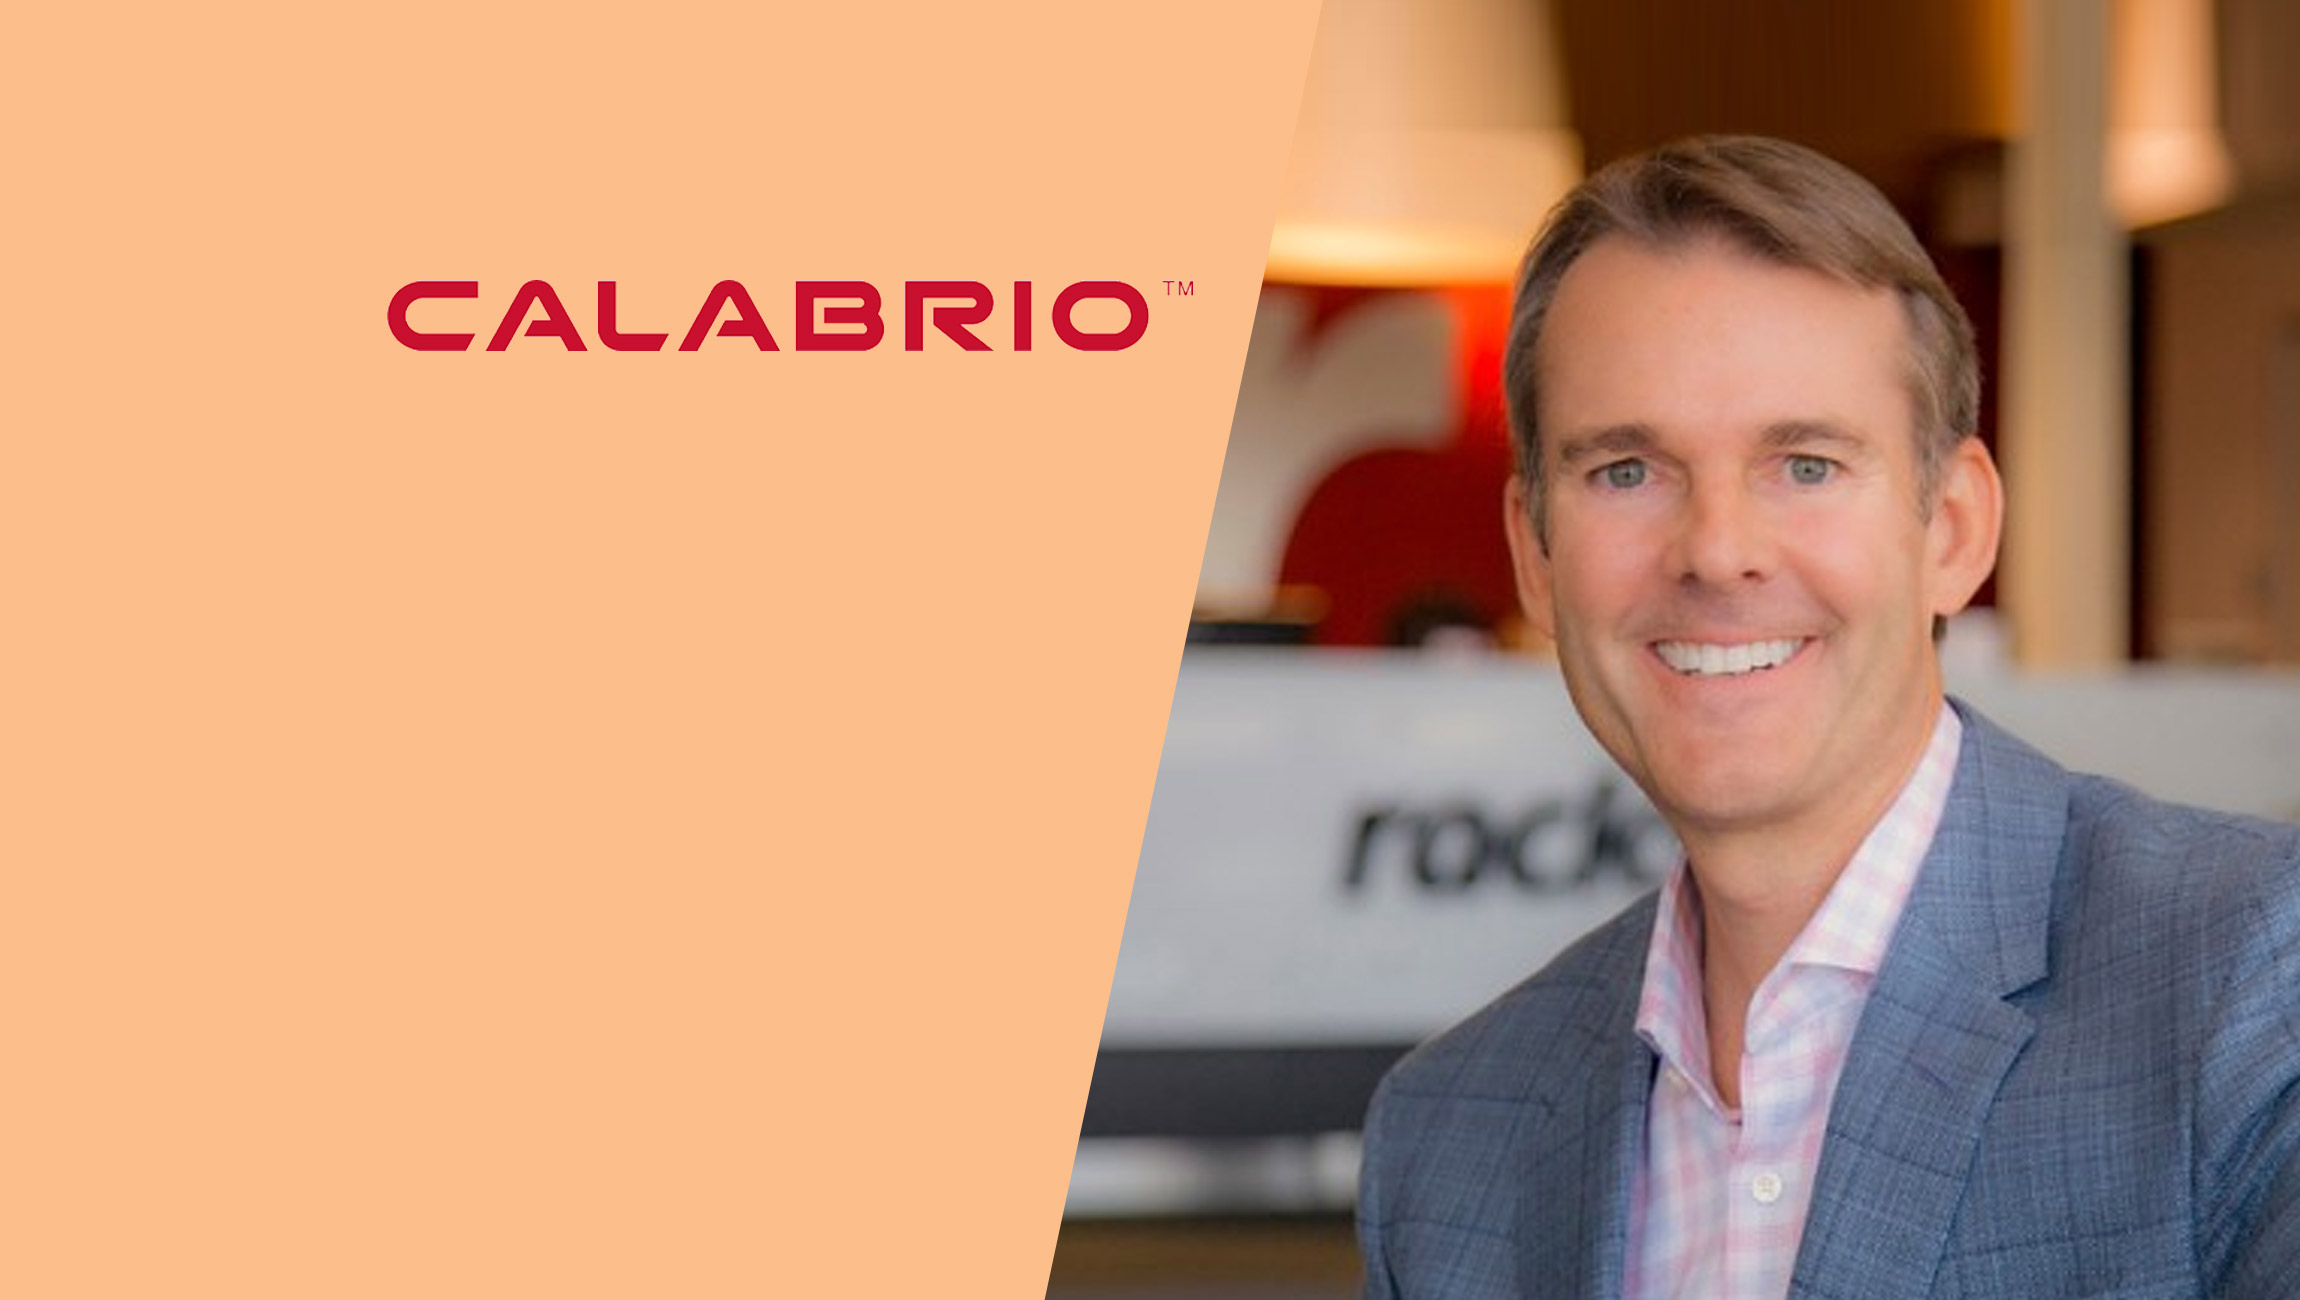 Calabrio Appoints Kevin M. Jones as CEO to Lead the Company in its Next Stage of Growth